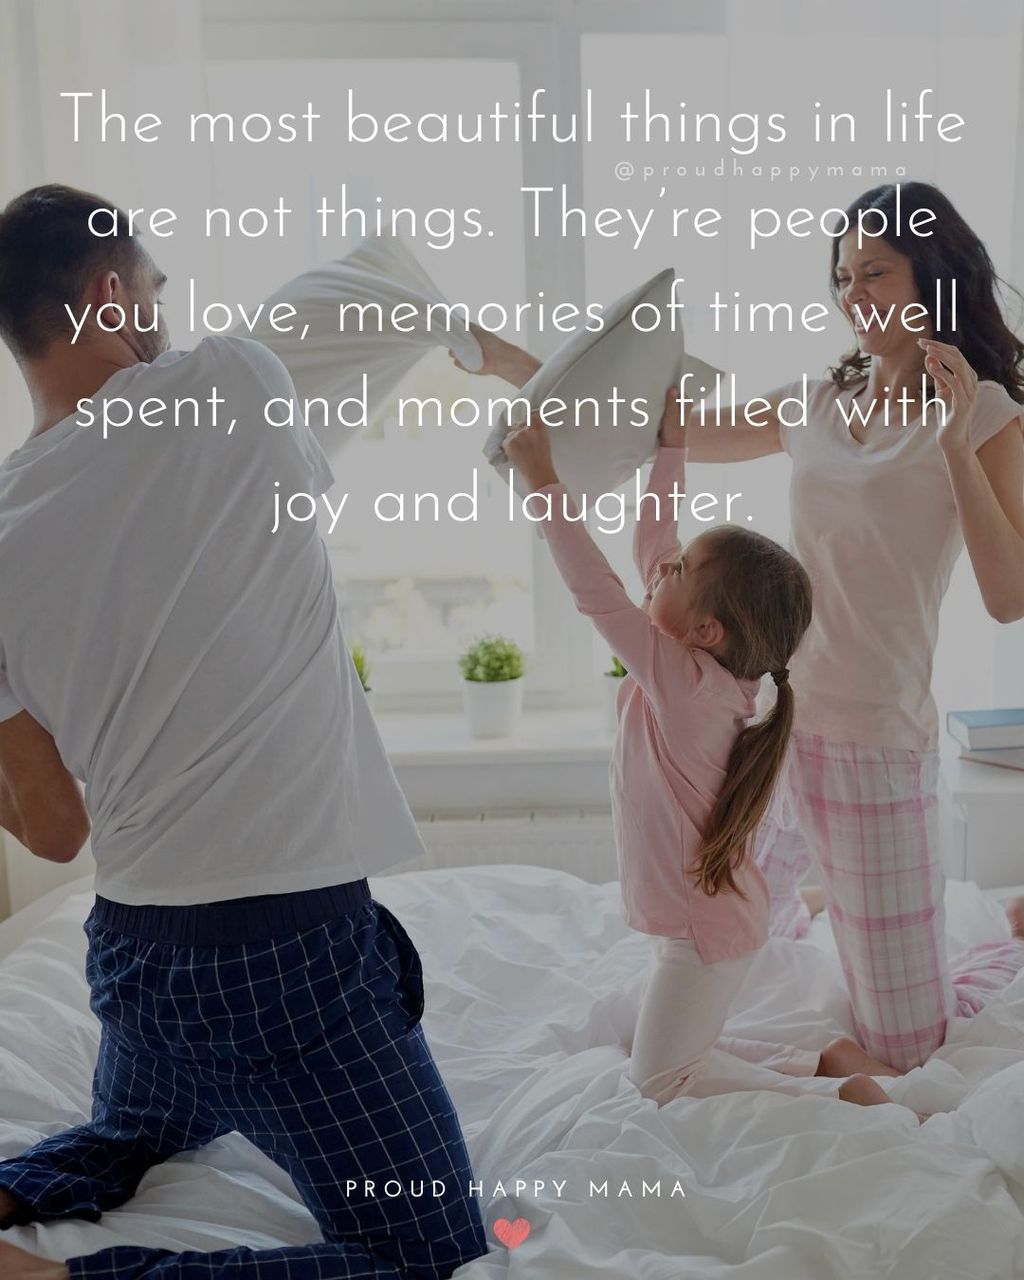 Love Quotes Family | The most beautiful things in life are not things. They’re people you love, memories of time well spent, and moments filled with joy and laughter.